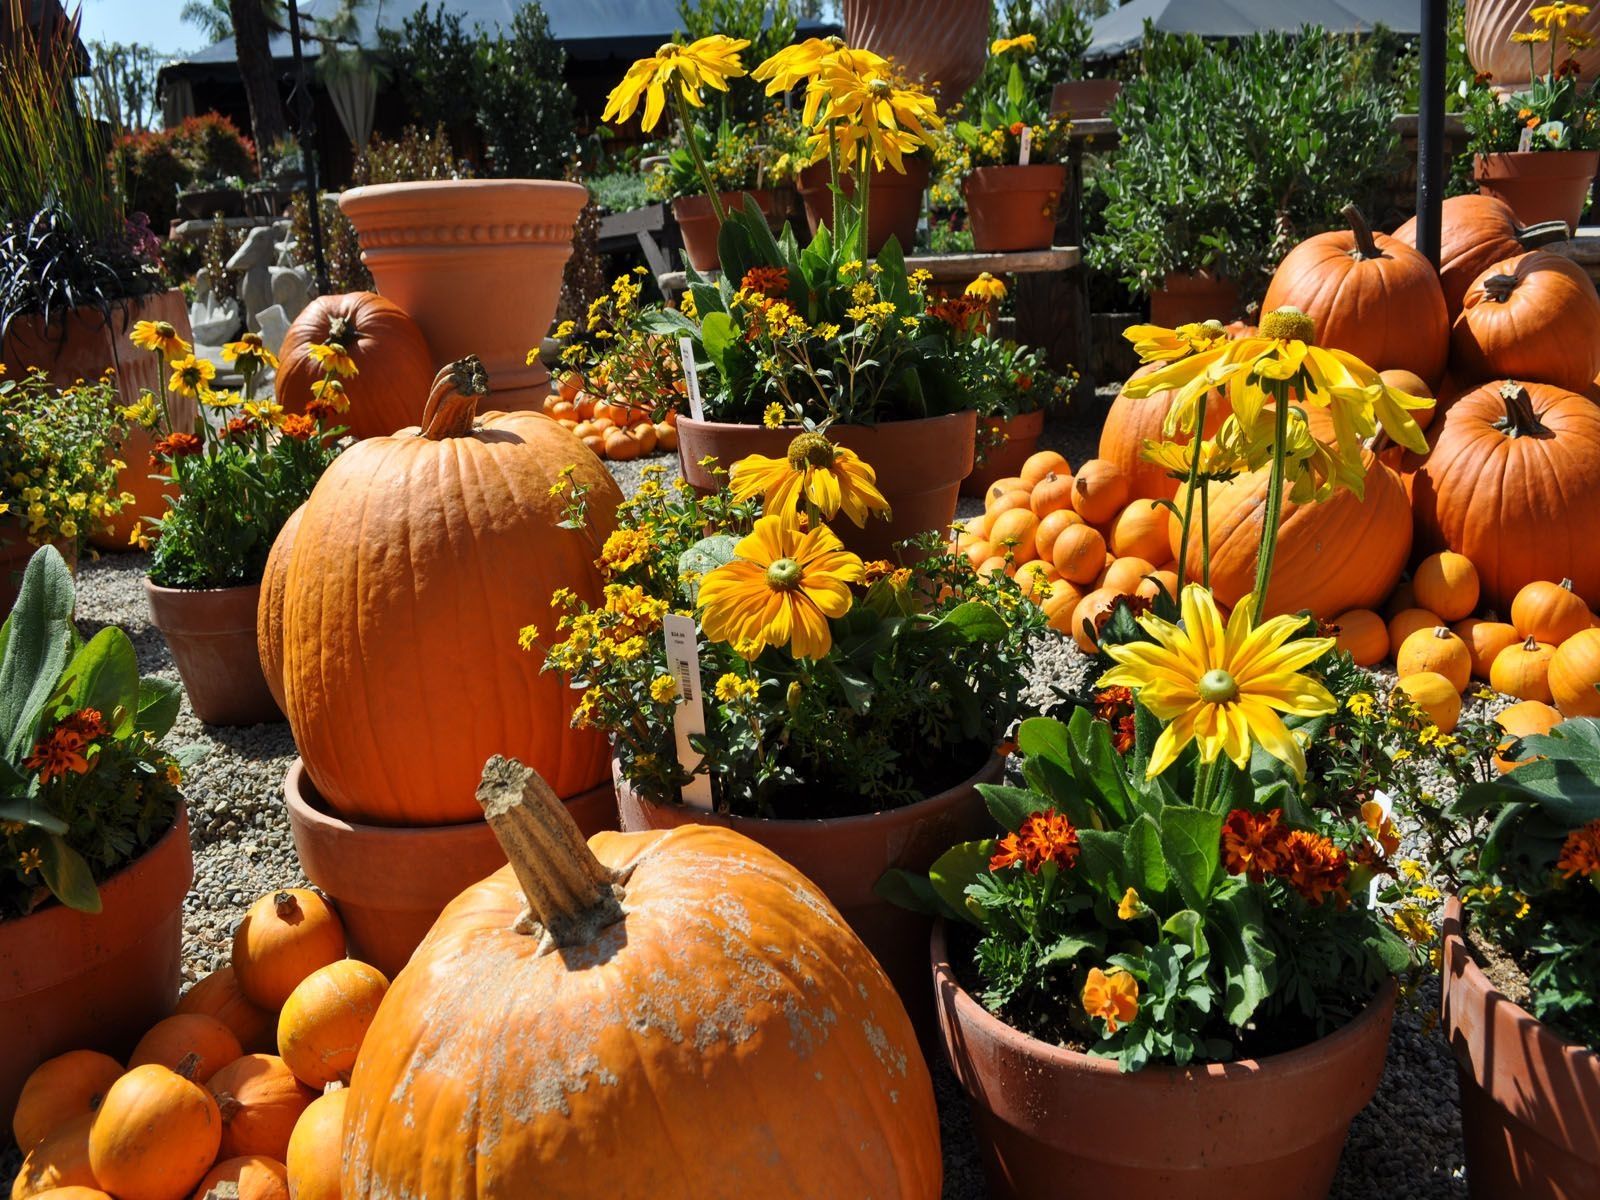 Pumpkins and Flowers Wallpaper Free Pumpkins and Flowers Background